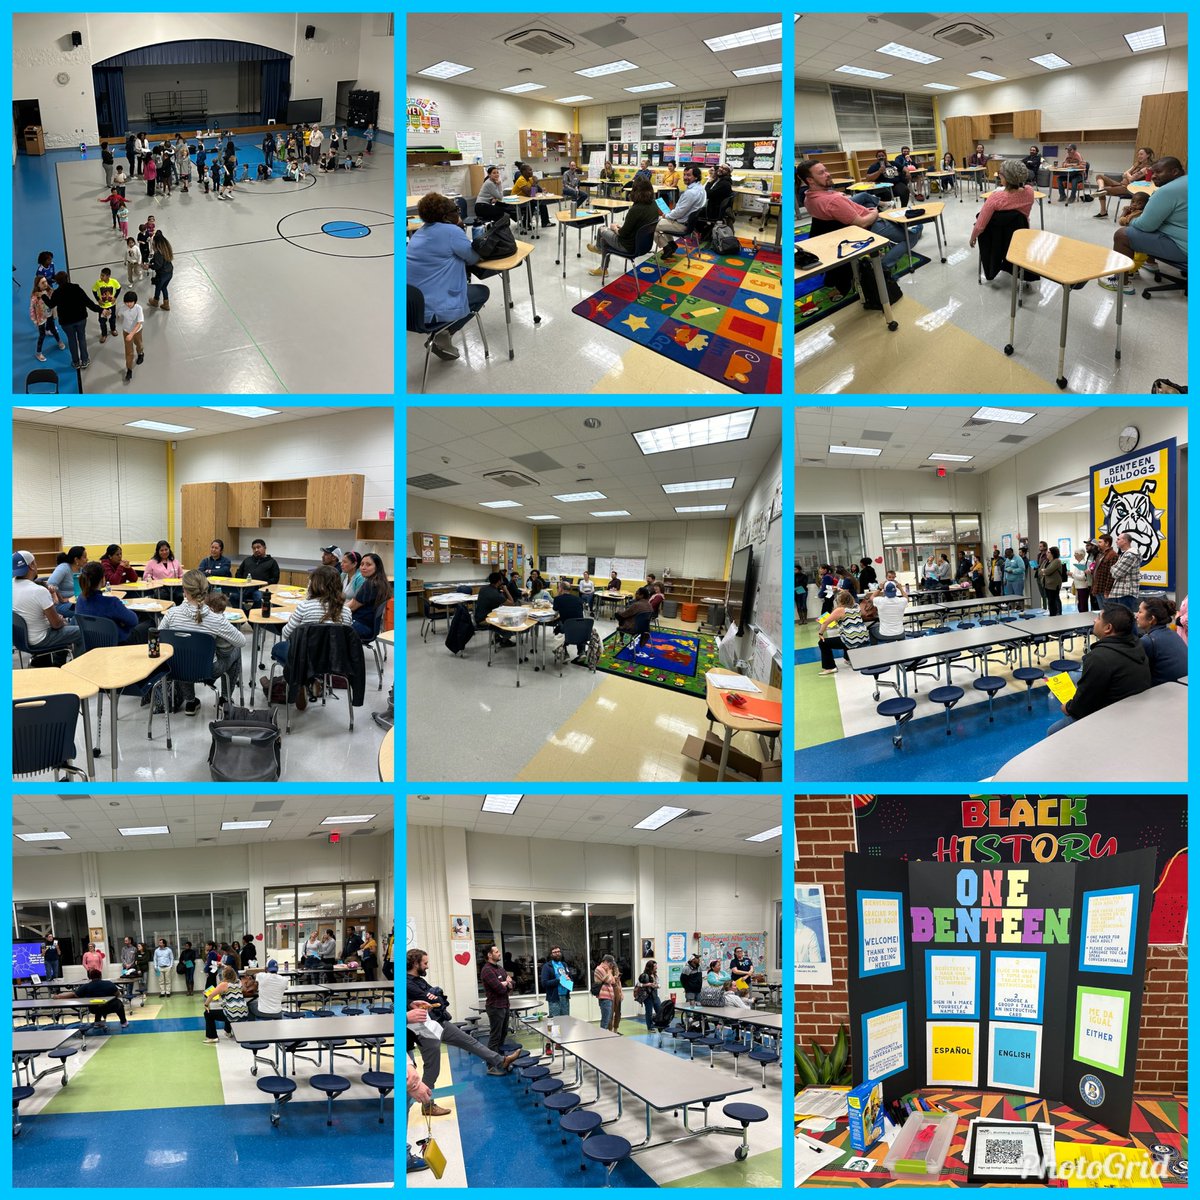 So about last night….we had our #OneBenteen event sponsored by our PTO to continue to build family engagement and community @APSBenteen! Let’s goooo! @APSFam_Alumn @lexology00 #authenticfamilyengagement